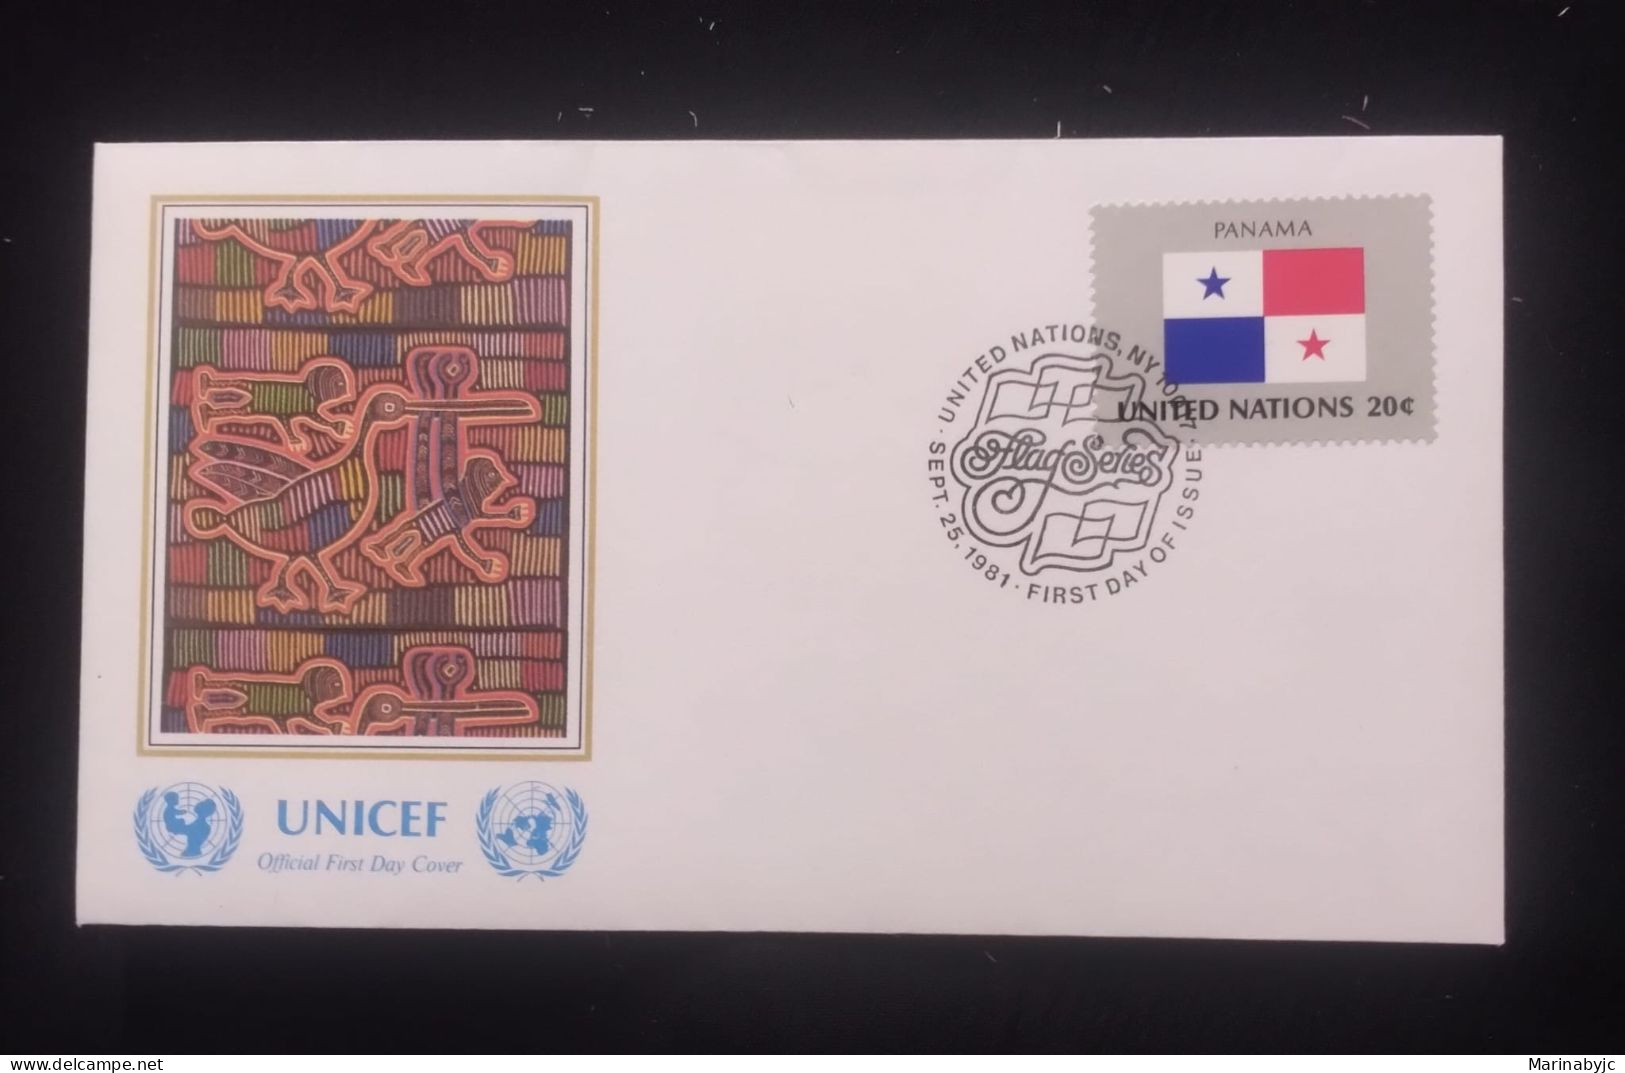 EL)1980 UNITED NATIONS, NATIONAL FLAG OF THE MEMBER COUNTRIES, PANAMA, ART - PAINTING, UNICEF, FDC - Ungebraucht